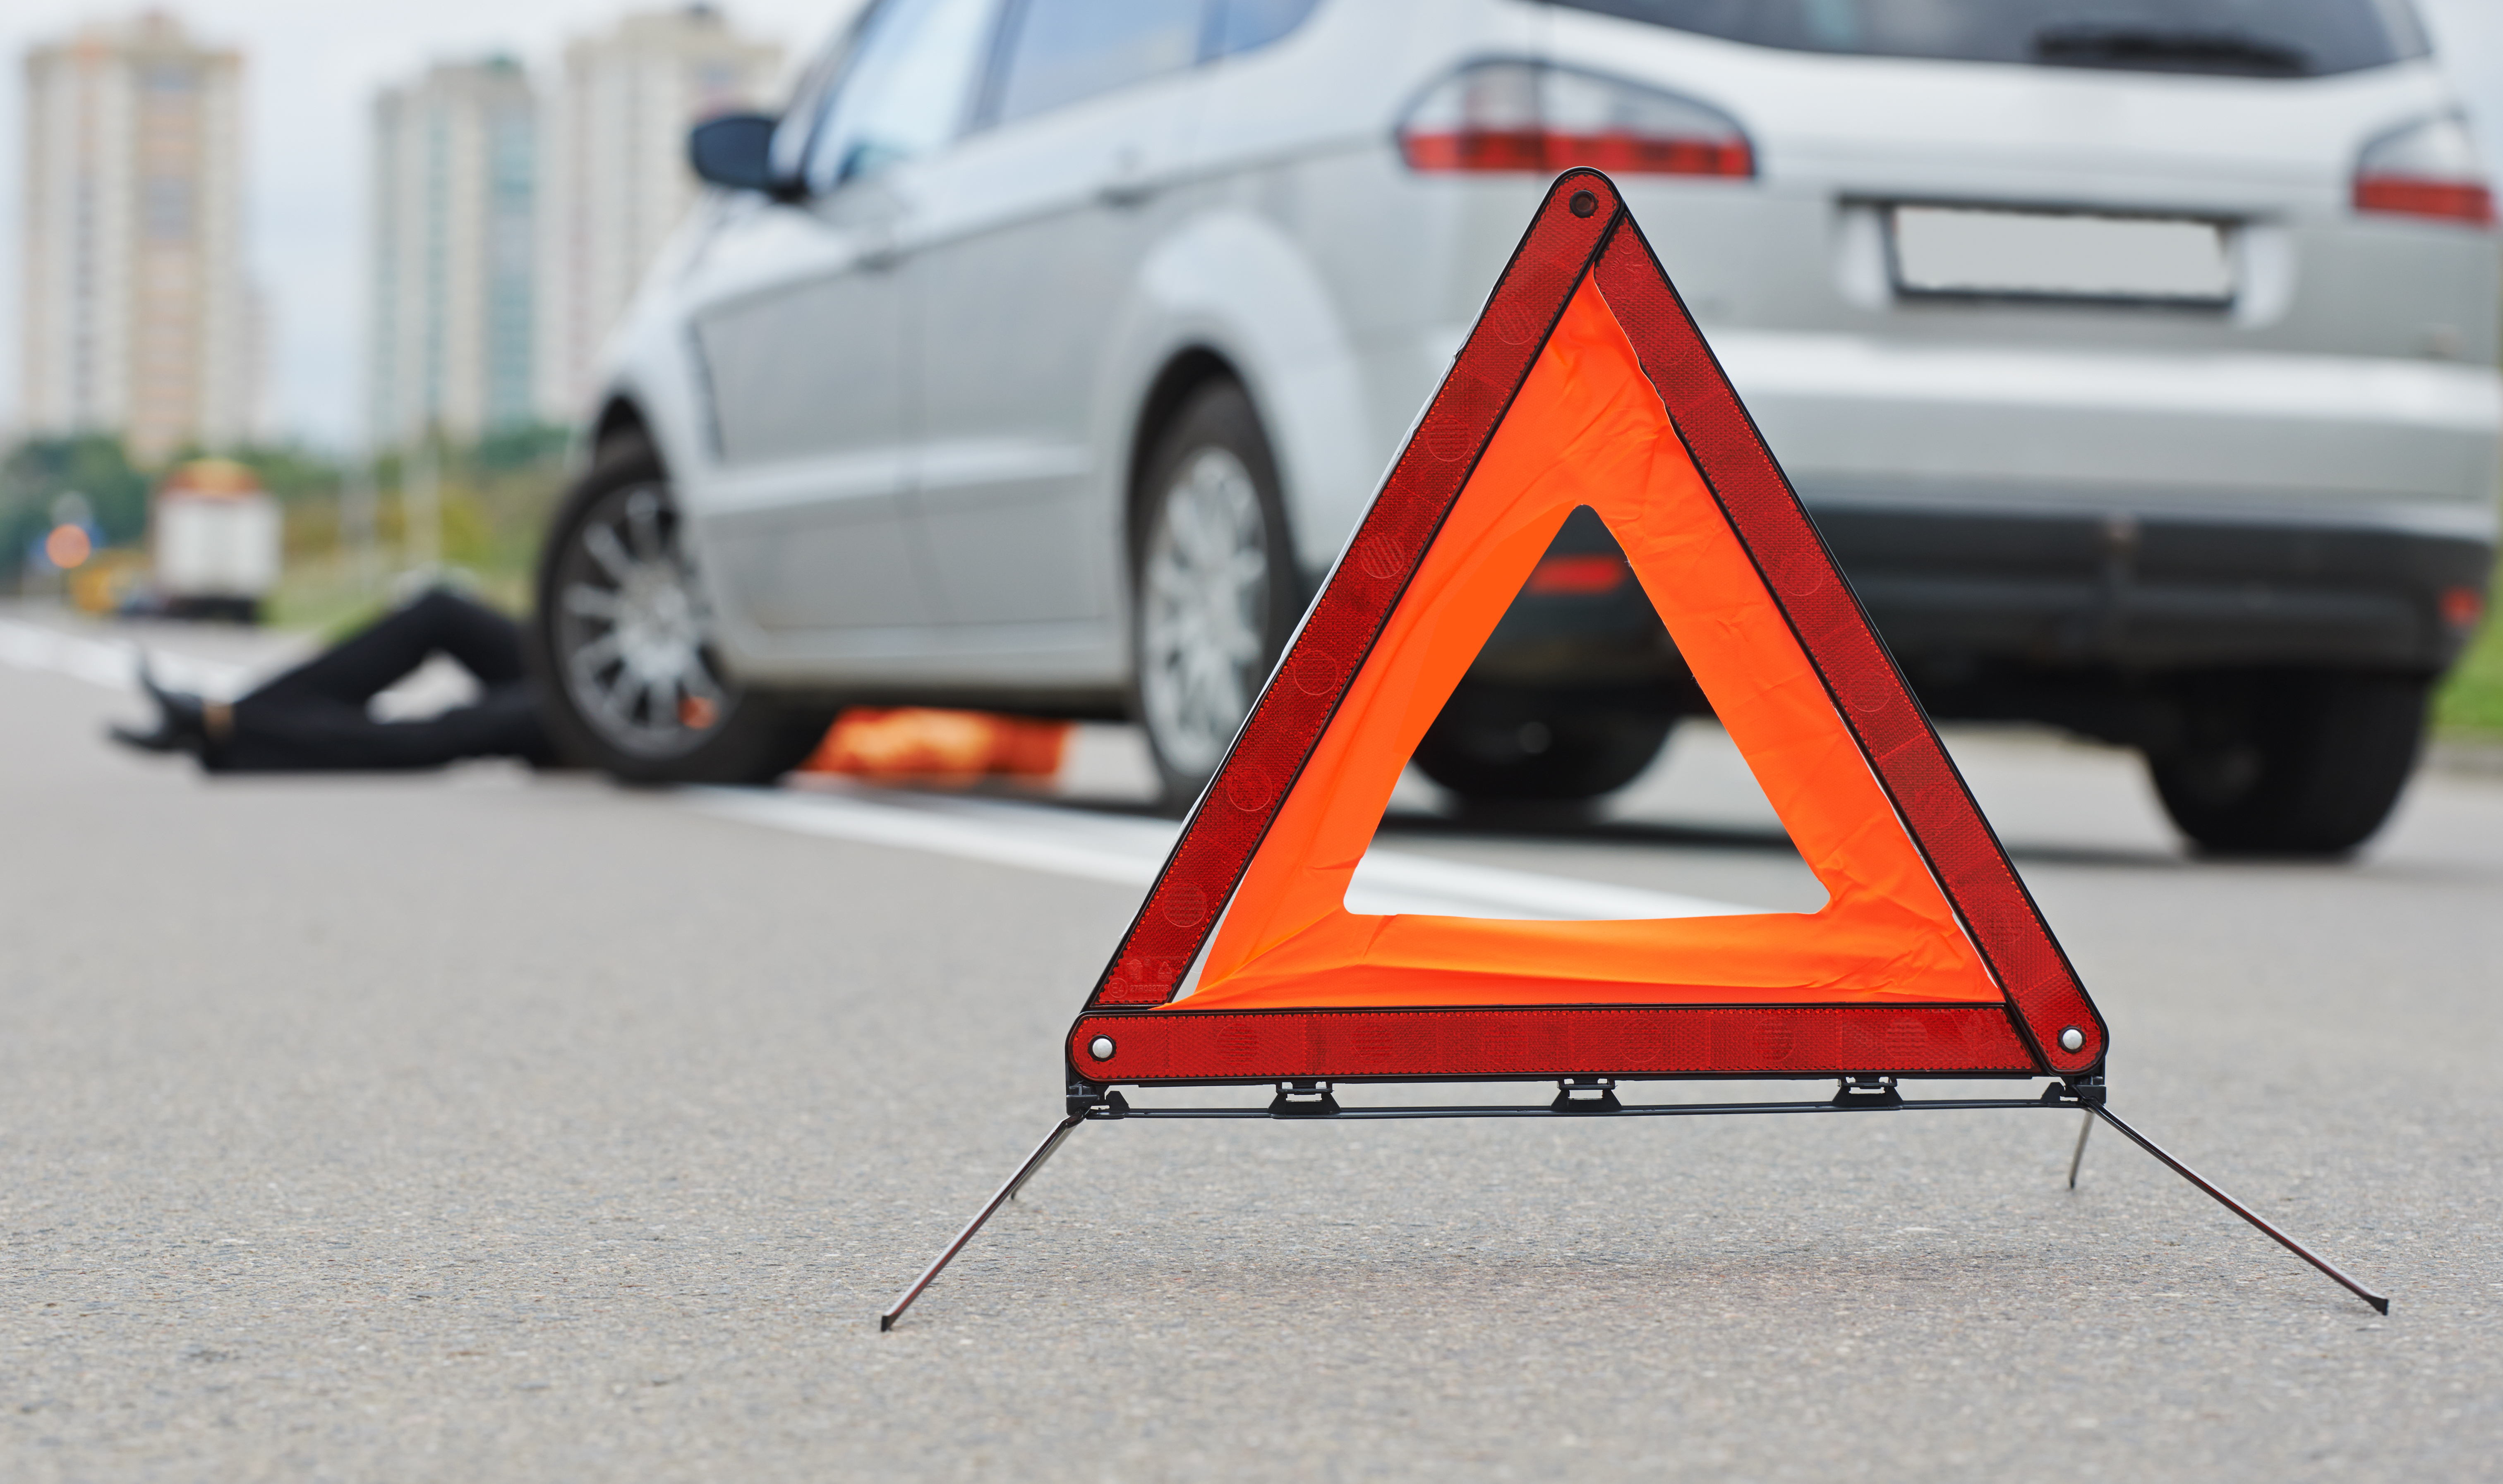 Pop up roadside warning cones with an out of focus car on the side of the road 